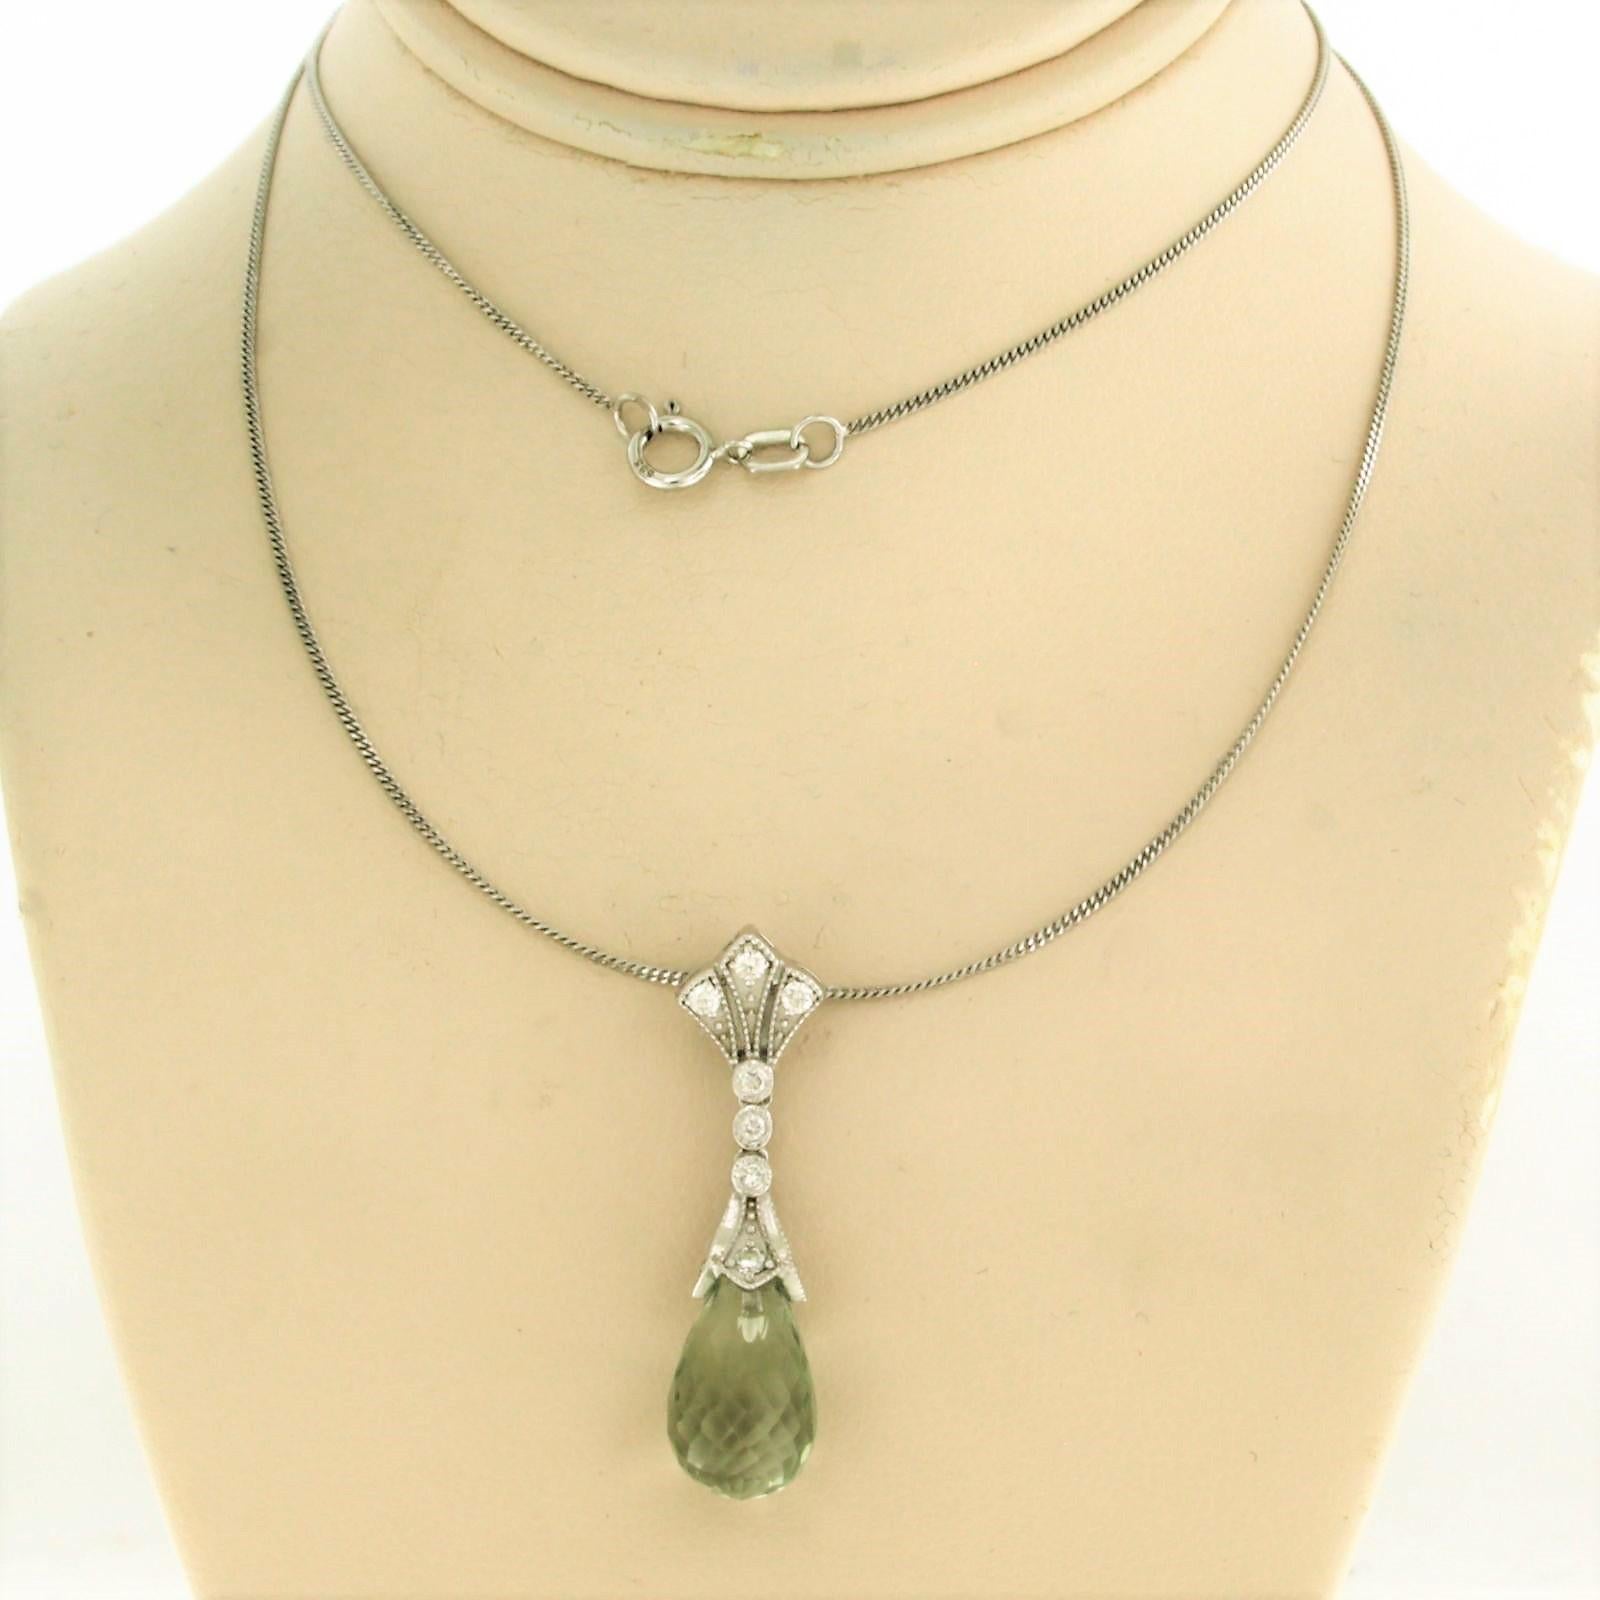 14k white gold necklace with pendant set with green amethyst and brilliant cut diamond. 0.20 ct - F/G - VS/SI - 45 cm long

Detailed description

the necklace is 45 cm long and 0.7 mm wide

The size of the pendant is 3.0 cm long by 8.0 mm